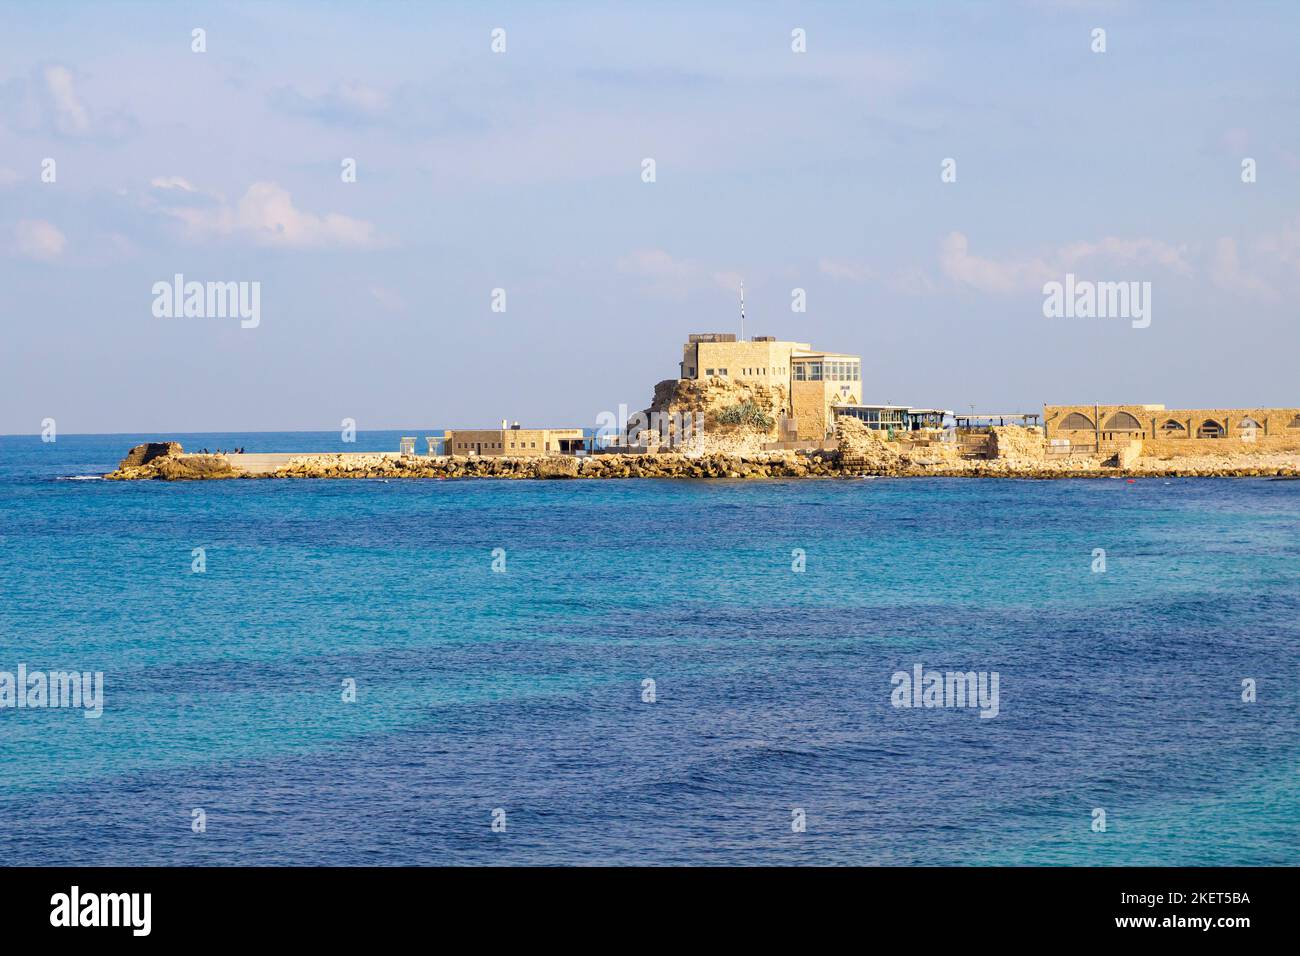 November 2022, The bay at Herod's Harbour that forms part of Caeserea Maritima on the Mediterranean Coast of Israel. This is a magnificent landmark Stock Photo